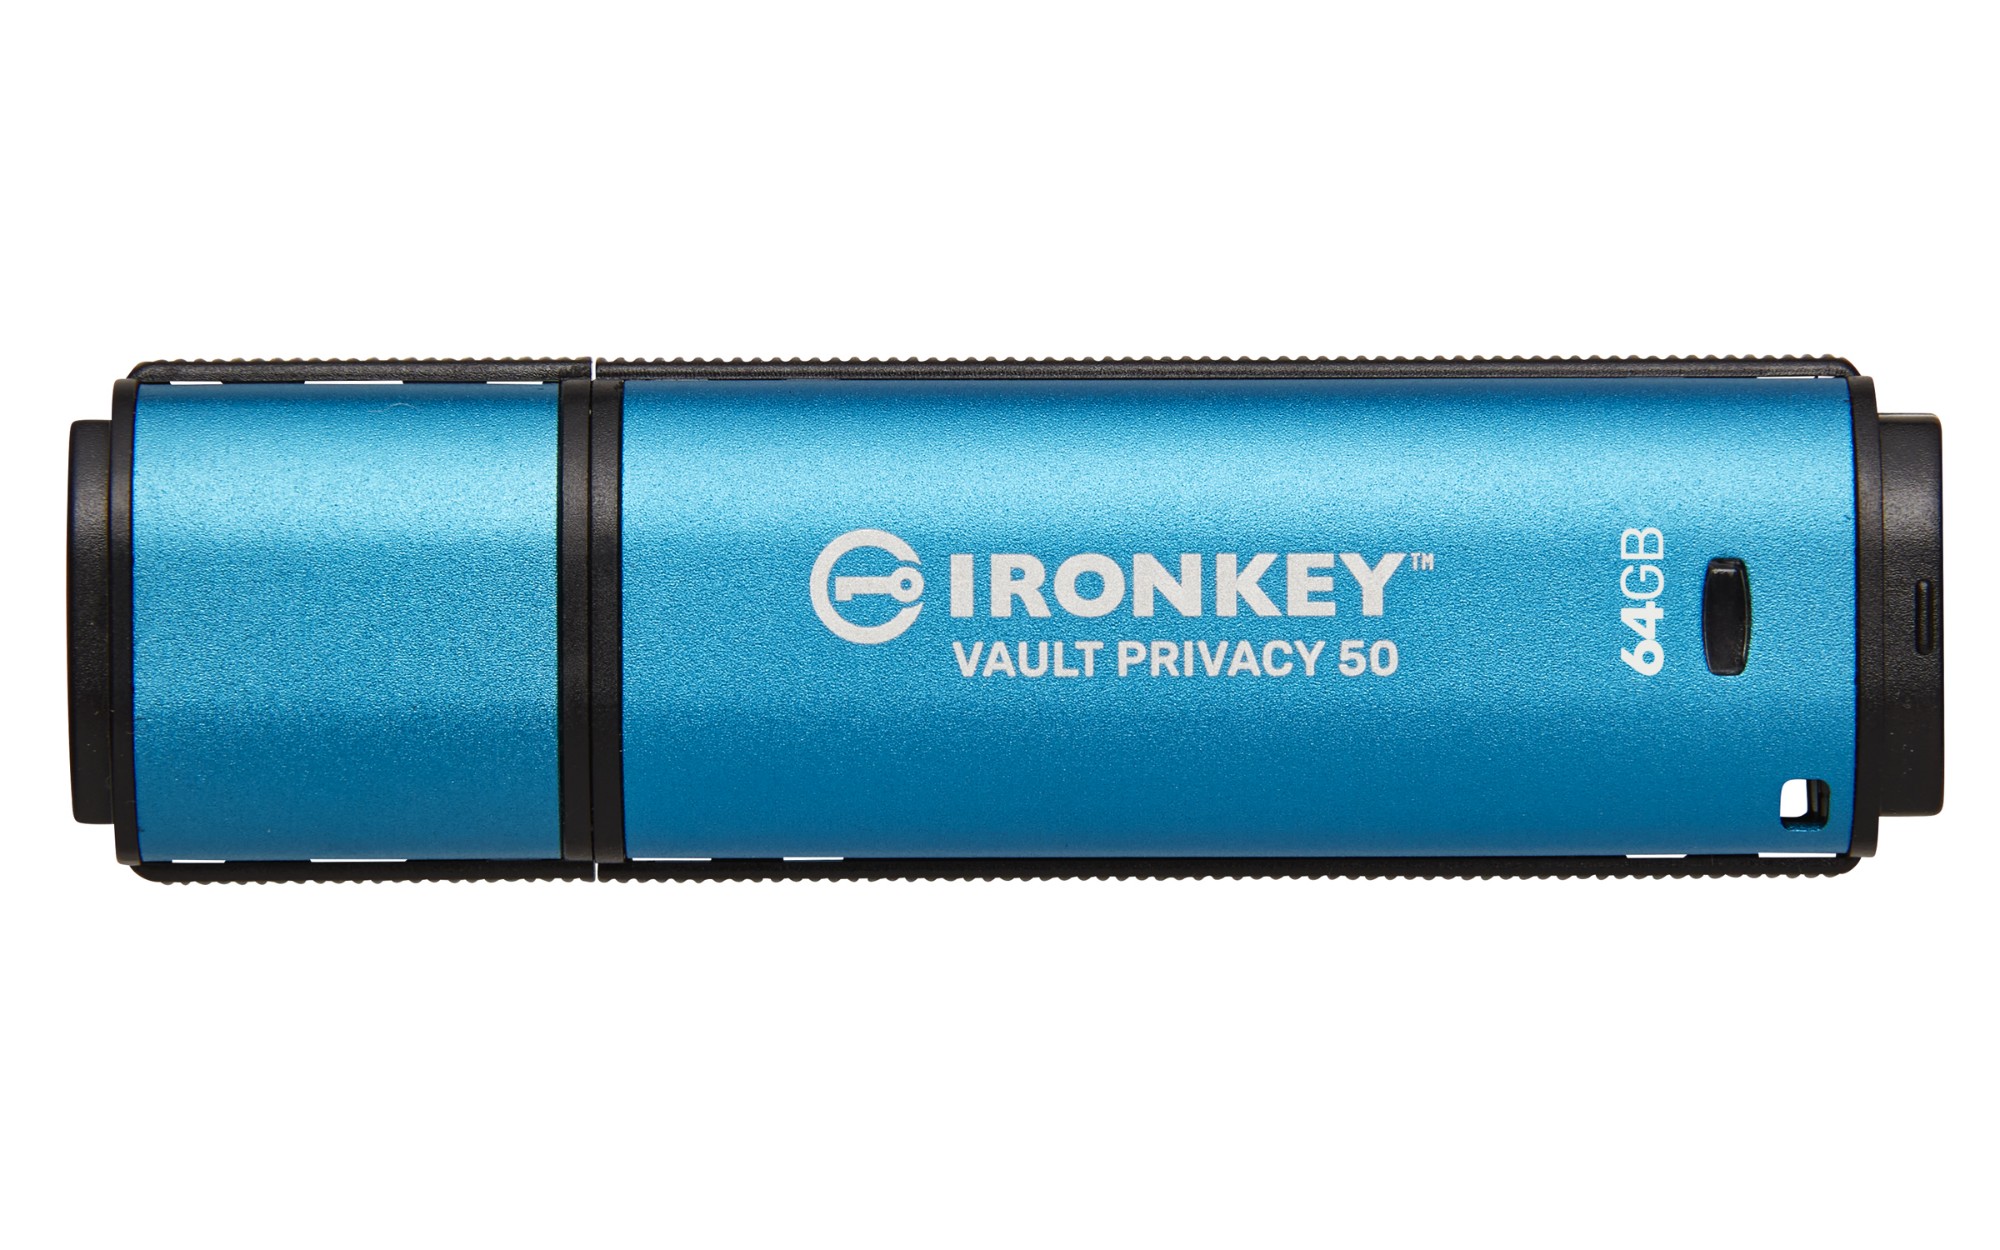 Kingston Technology IronKey 64GB Vault Privacy 50 AES-256 Encrypted, FIPS 197